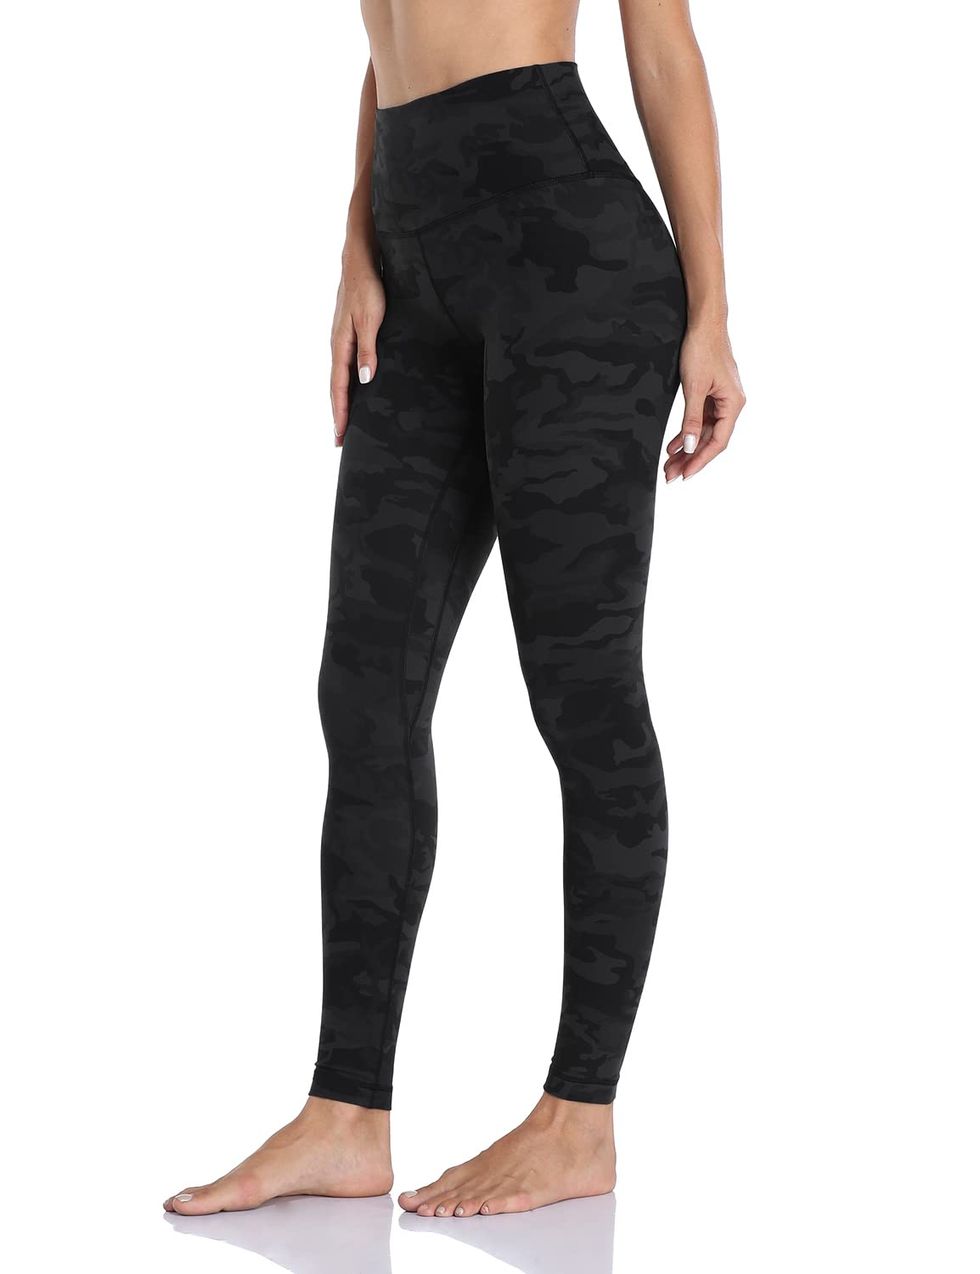 These affordable running trousers are being hailed as a Lululemon dupe